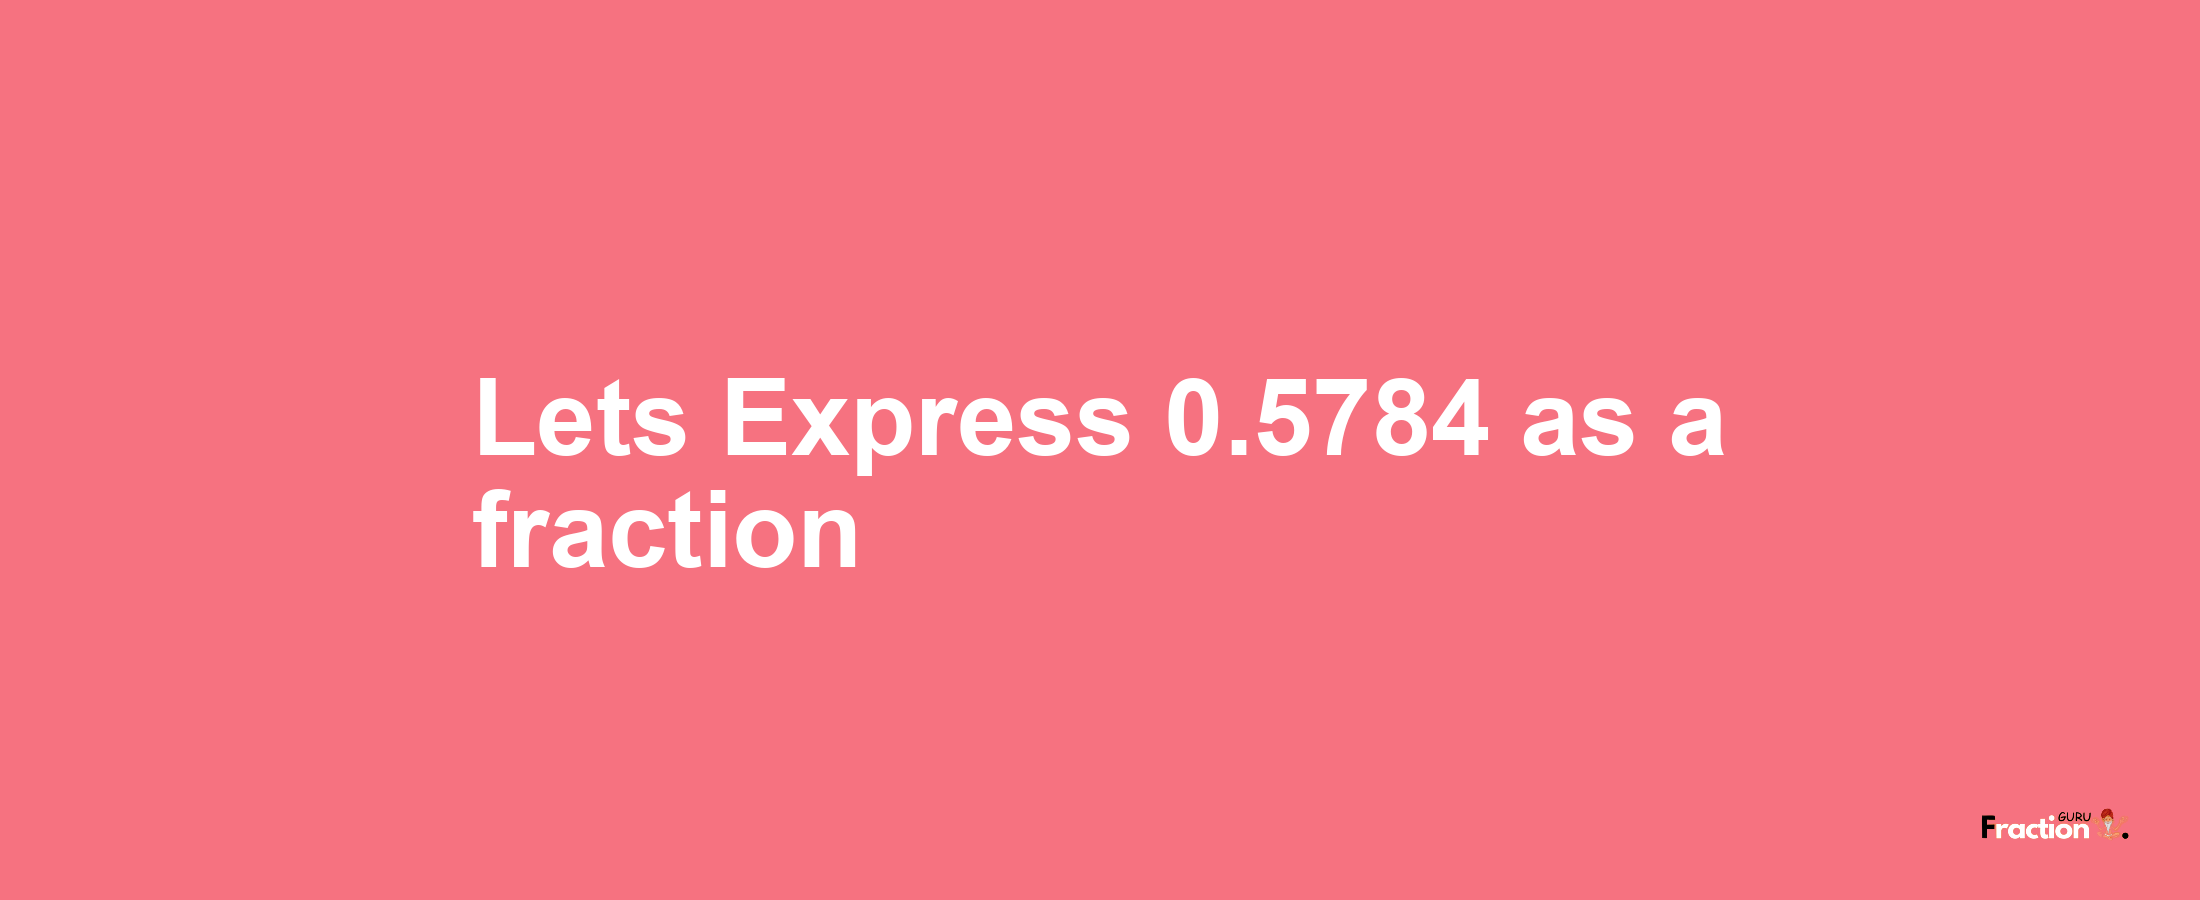 Lets Express 0.5784 as afraction